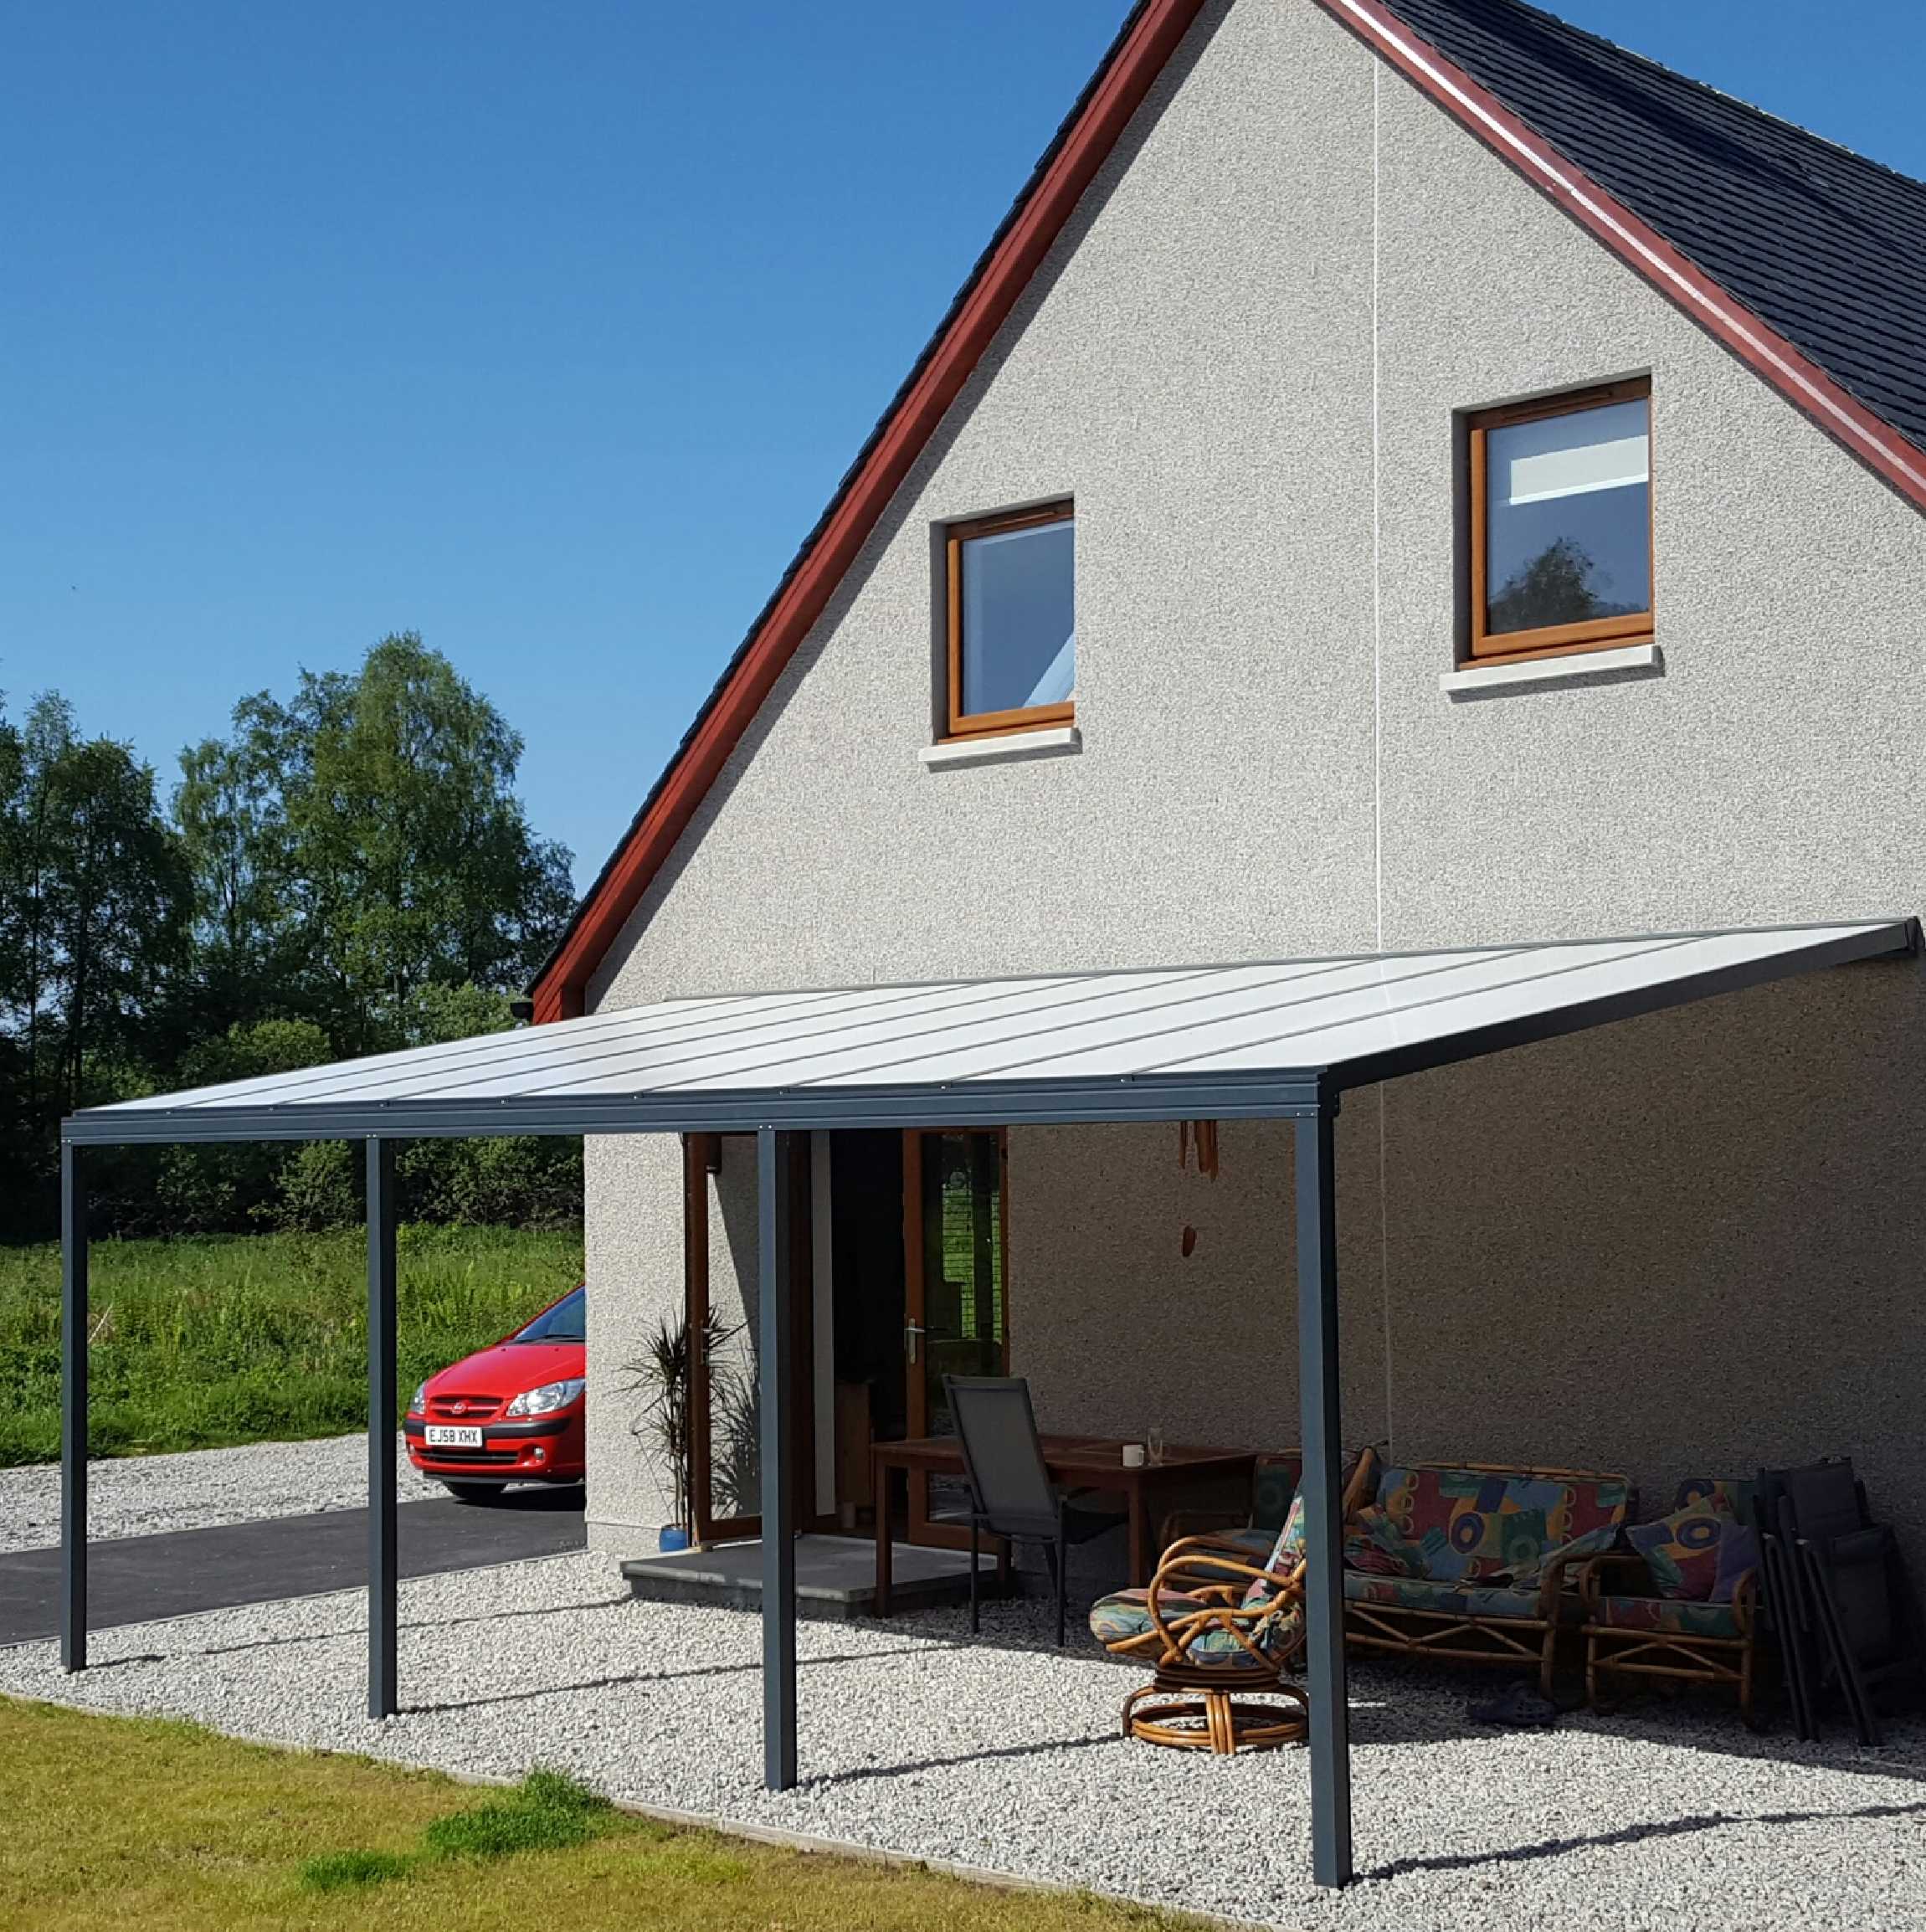 Great selection of SPECIAL OFFER Omega Smart Lean-To Canopy, Anthracite Grey, 16mm Polycarbonate Glazing - 3.1m (W) x 2.5m (P), (2) Supporting Posts